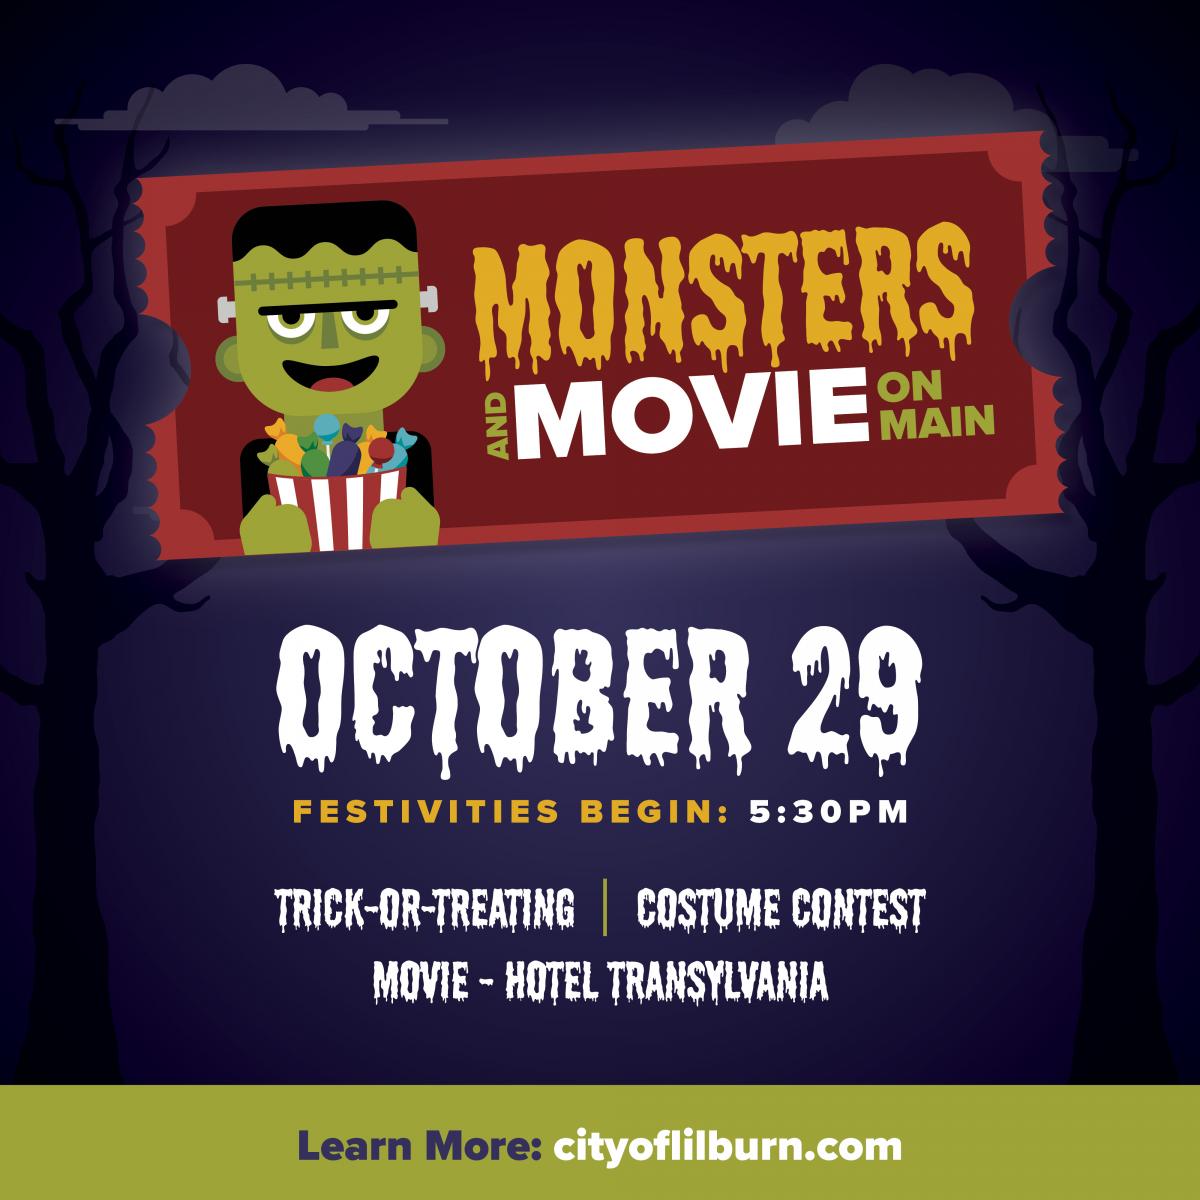 Monsters and Movie on Main